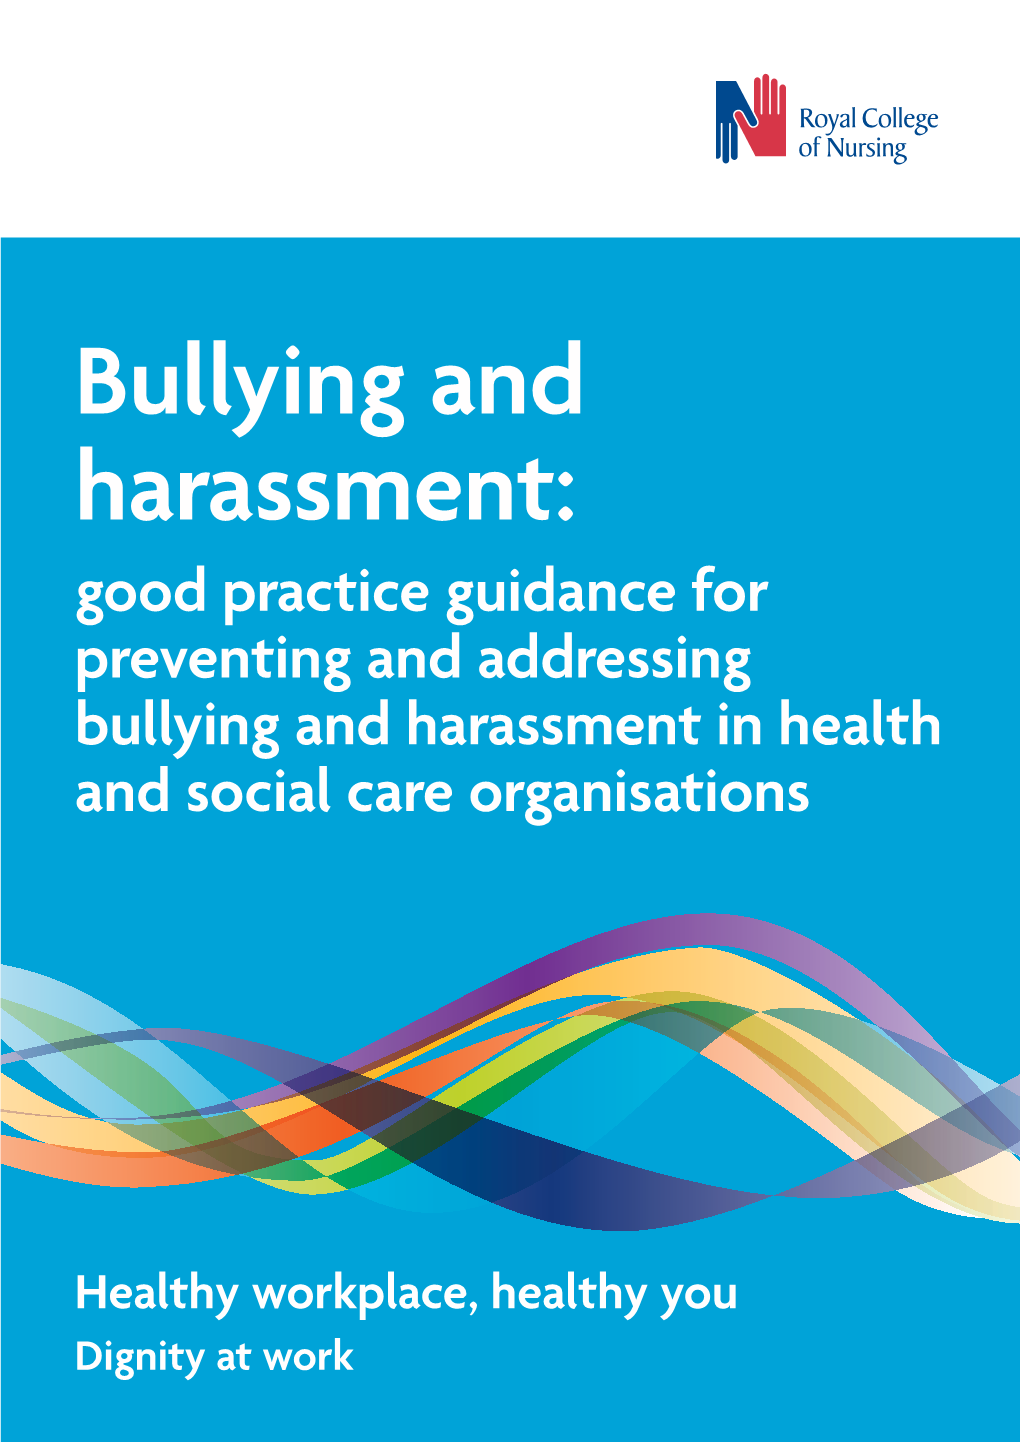 Good Practice Guidance for Preventing and Addressing Bullying and Harassment in Health and Social Care Organisations